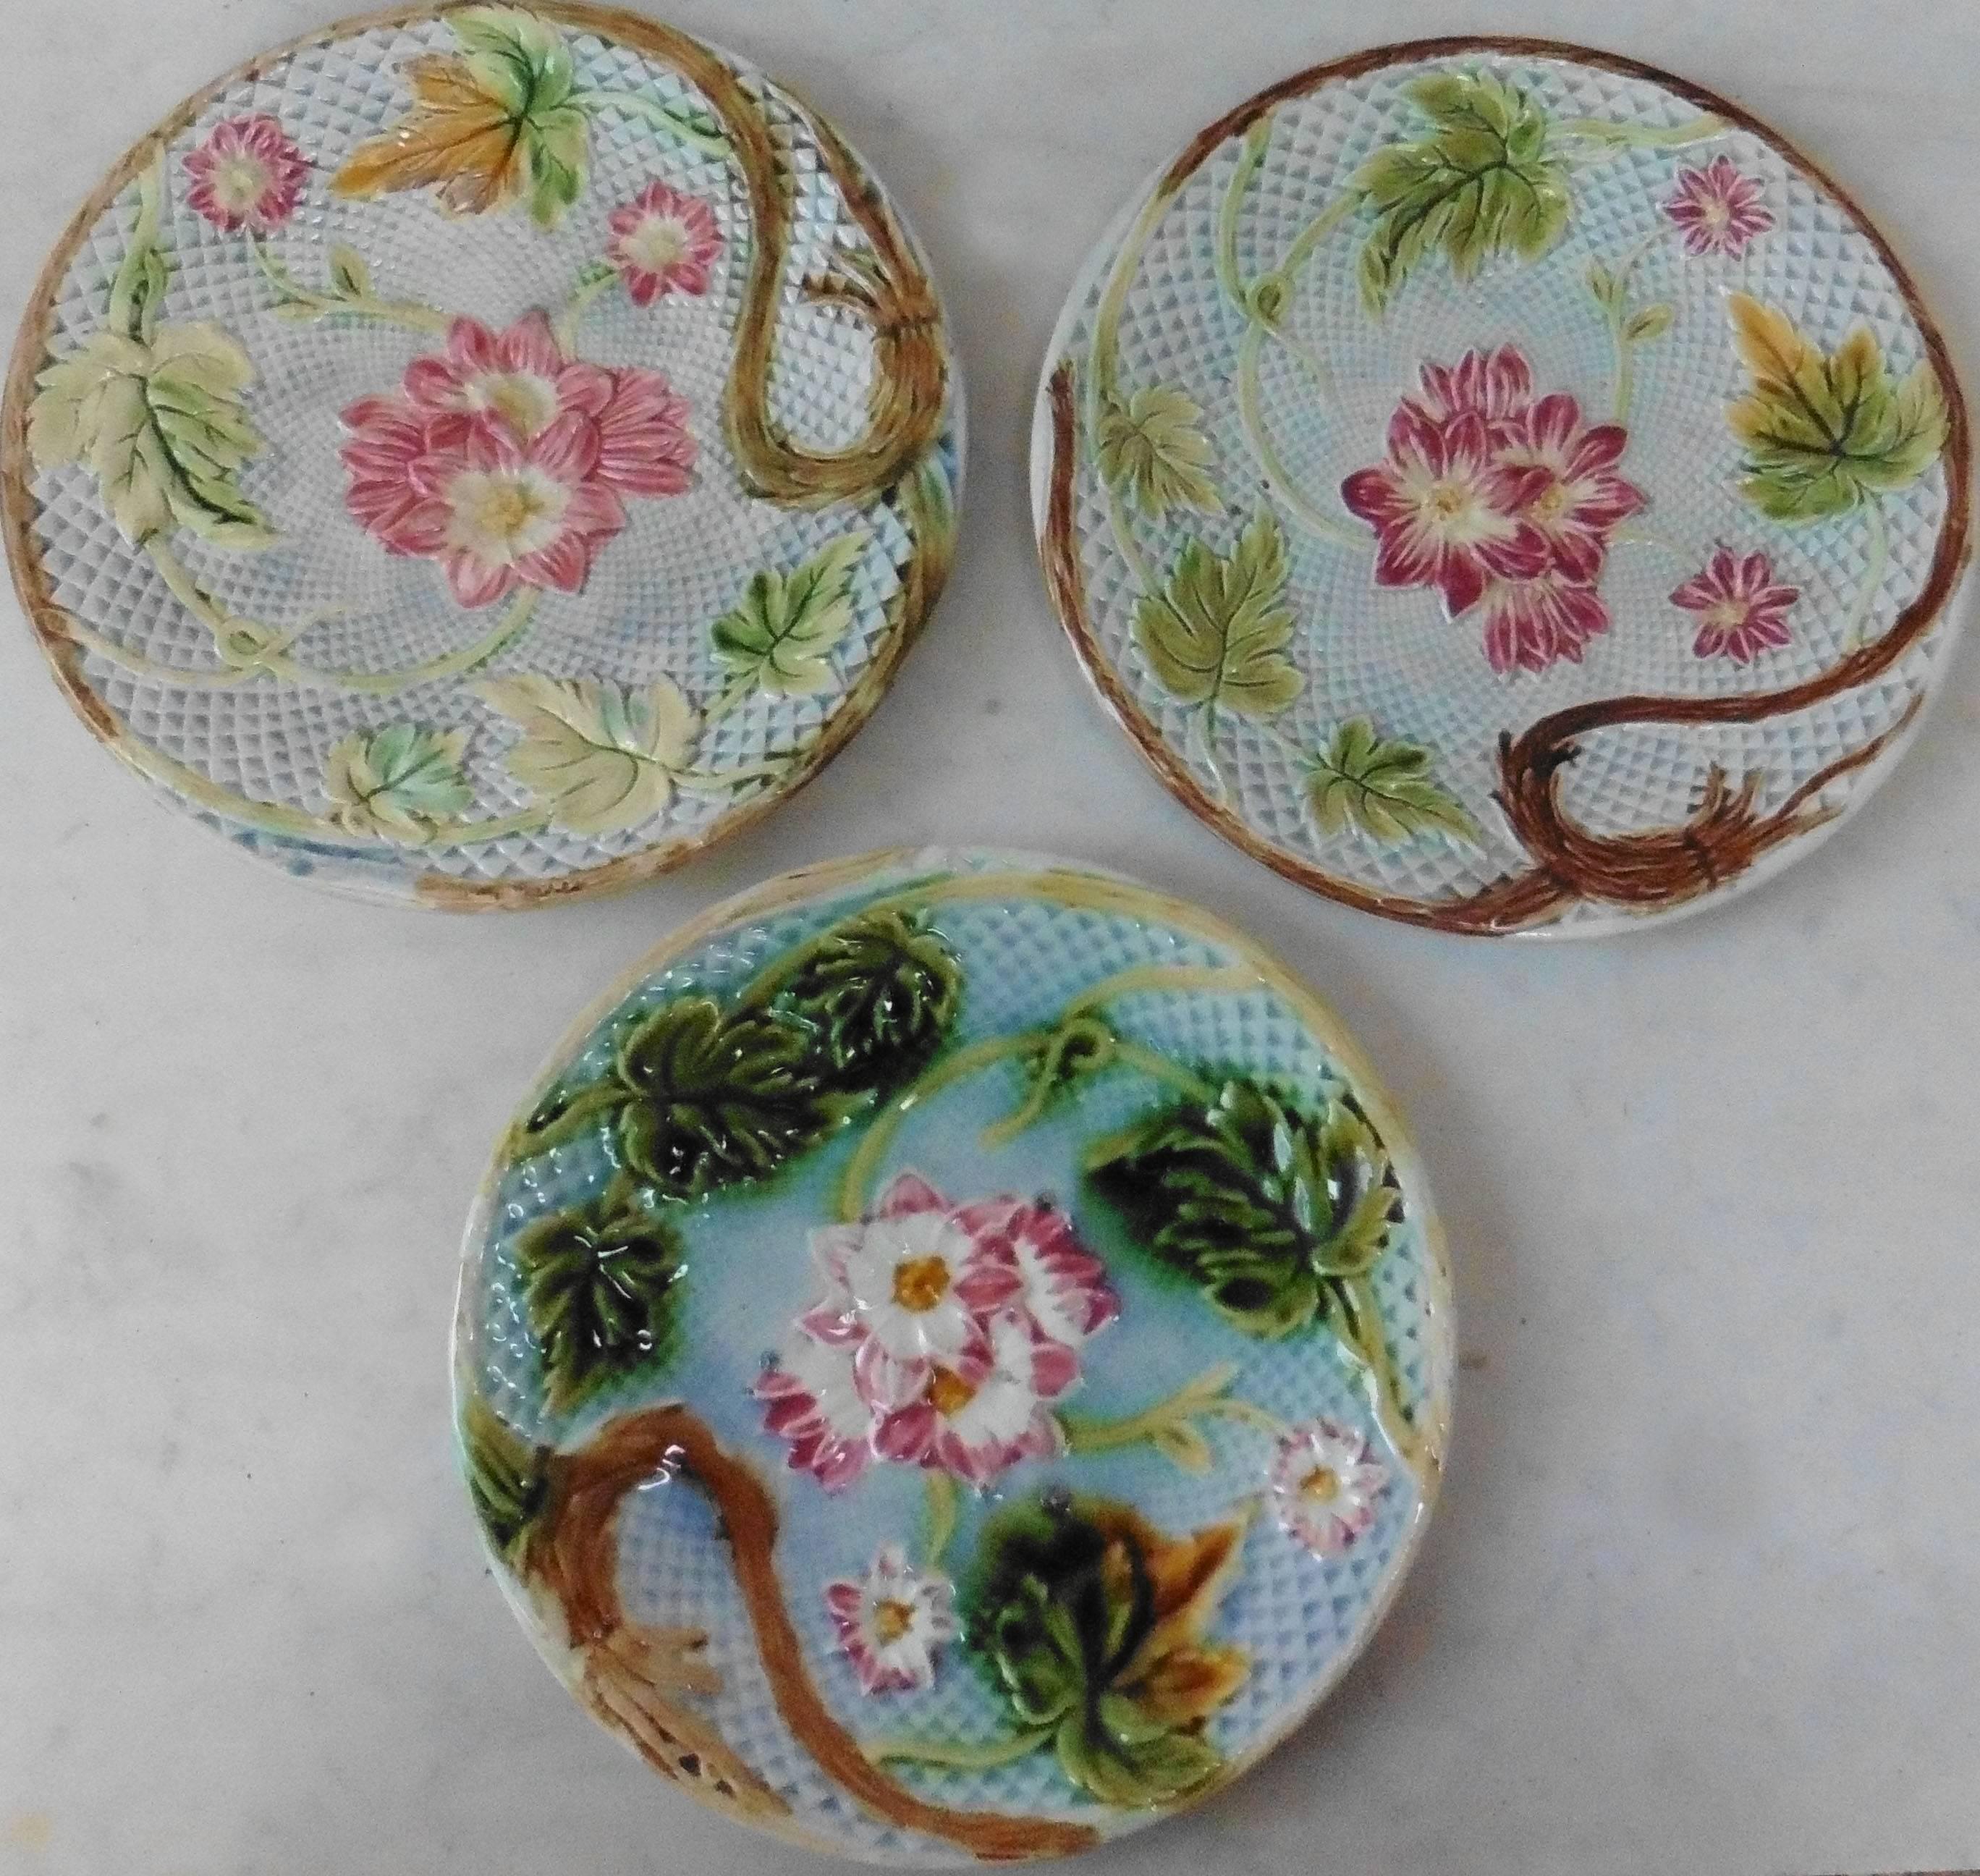 Lovely French Majolica plate pink flowers on a blue basketweave, circa 1880 attributed to Salins.